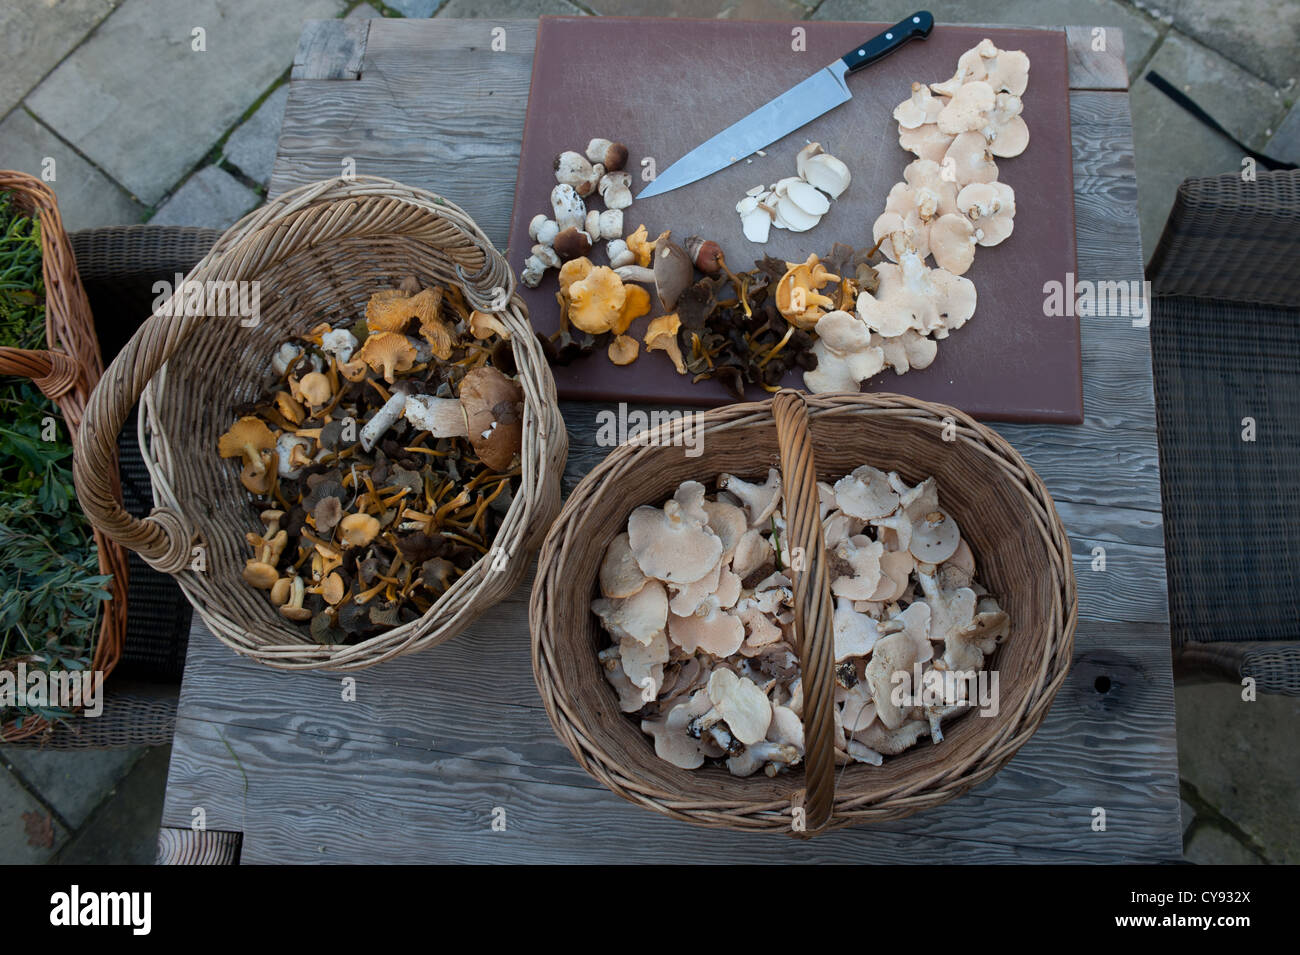 Foraged mushrooms and other wild forest produce Stock Photo